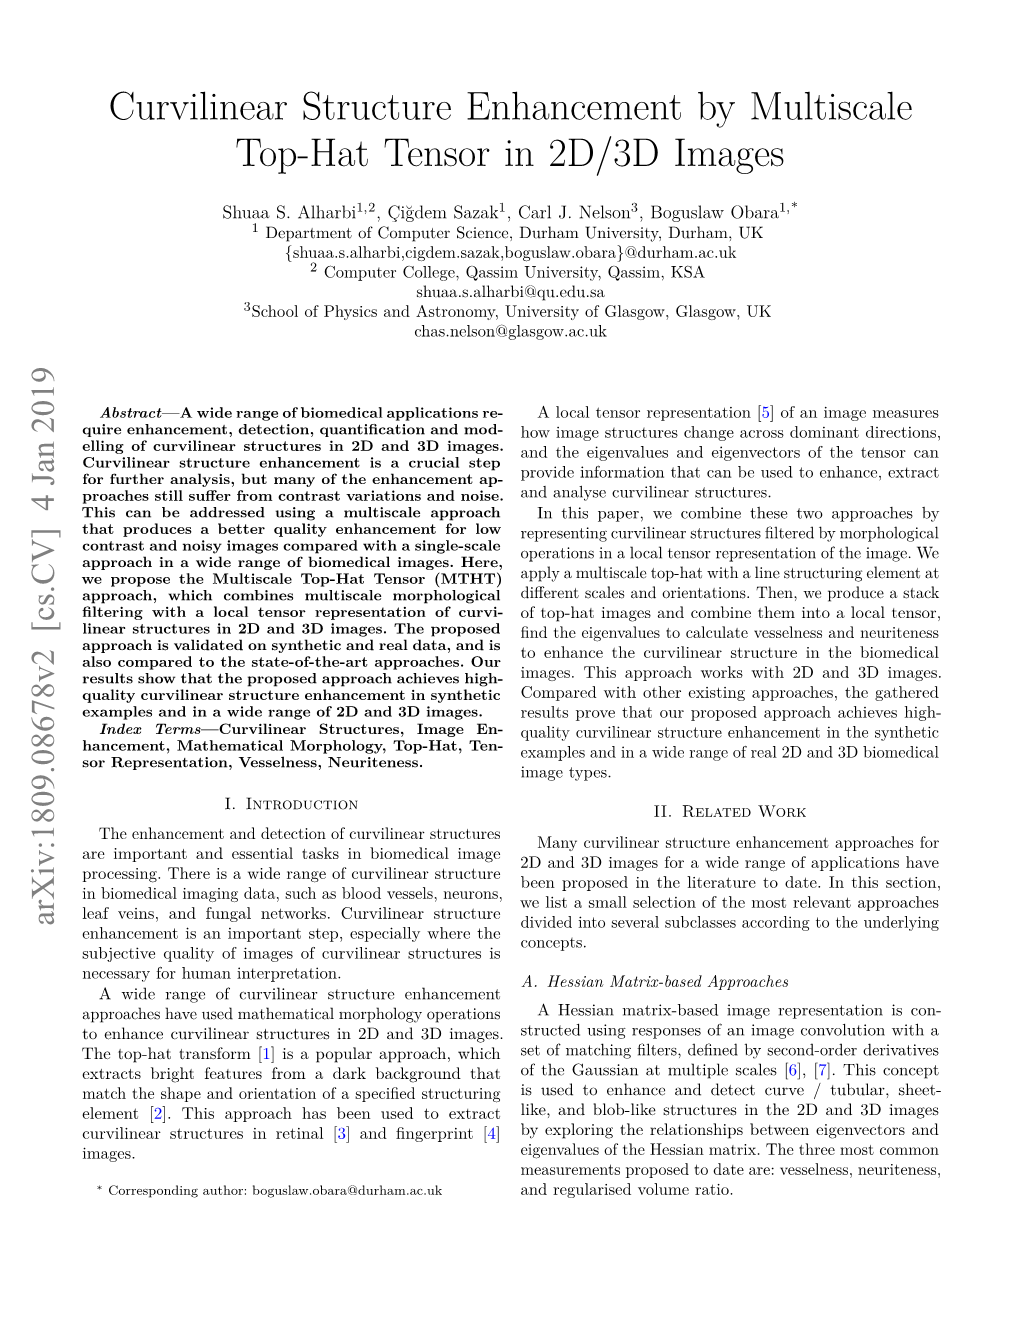 Curvilinear Structure Enhancement by Multiscale Top-Hat Tensor in 2D/3D Images